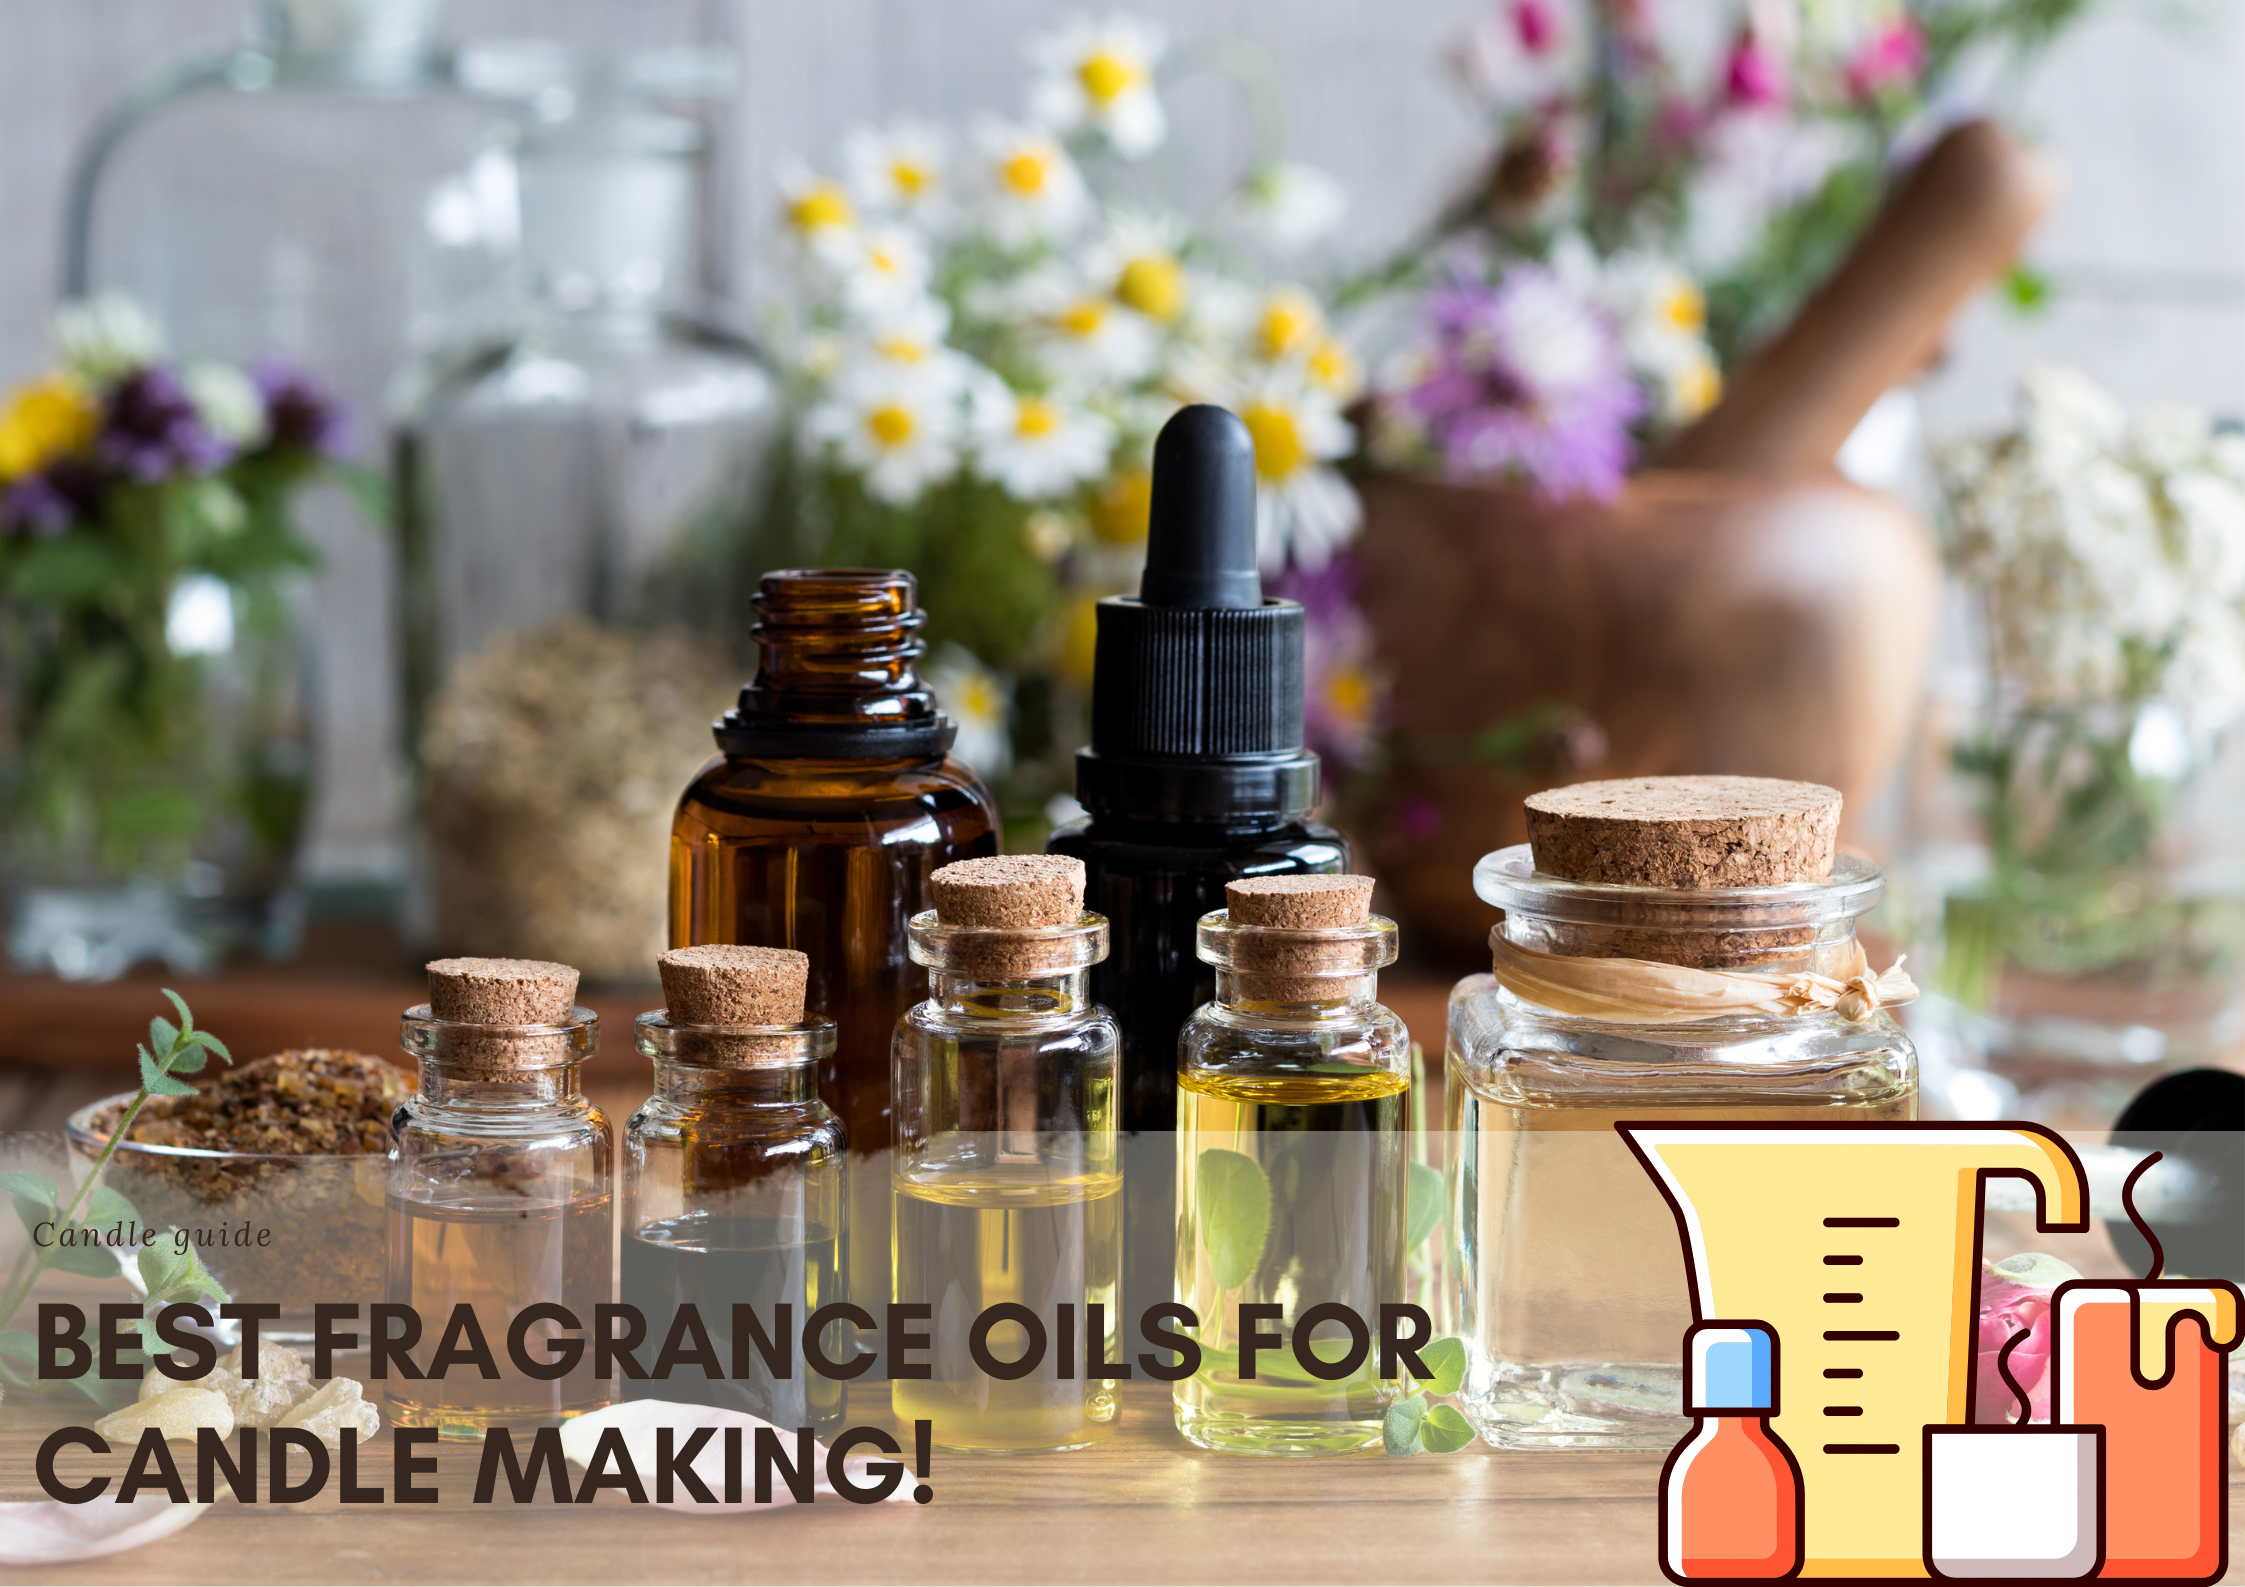 Best fragrance Oils for Candle Making! (Our Top 5 Scents) – Suffolk Candles